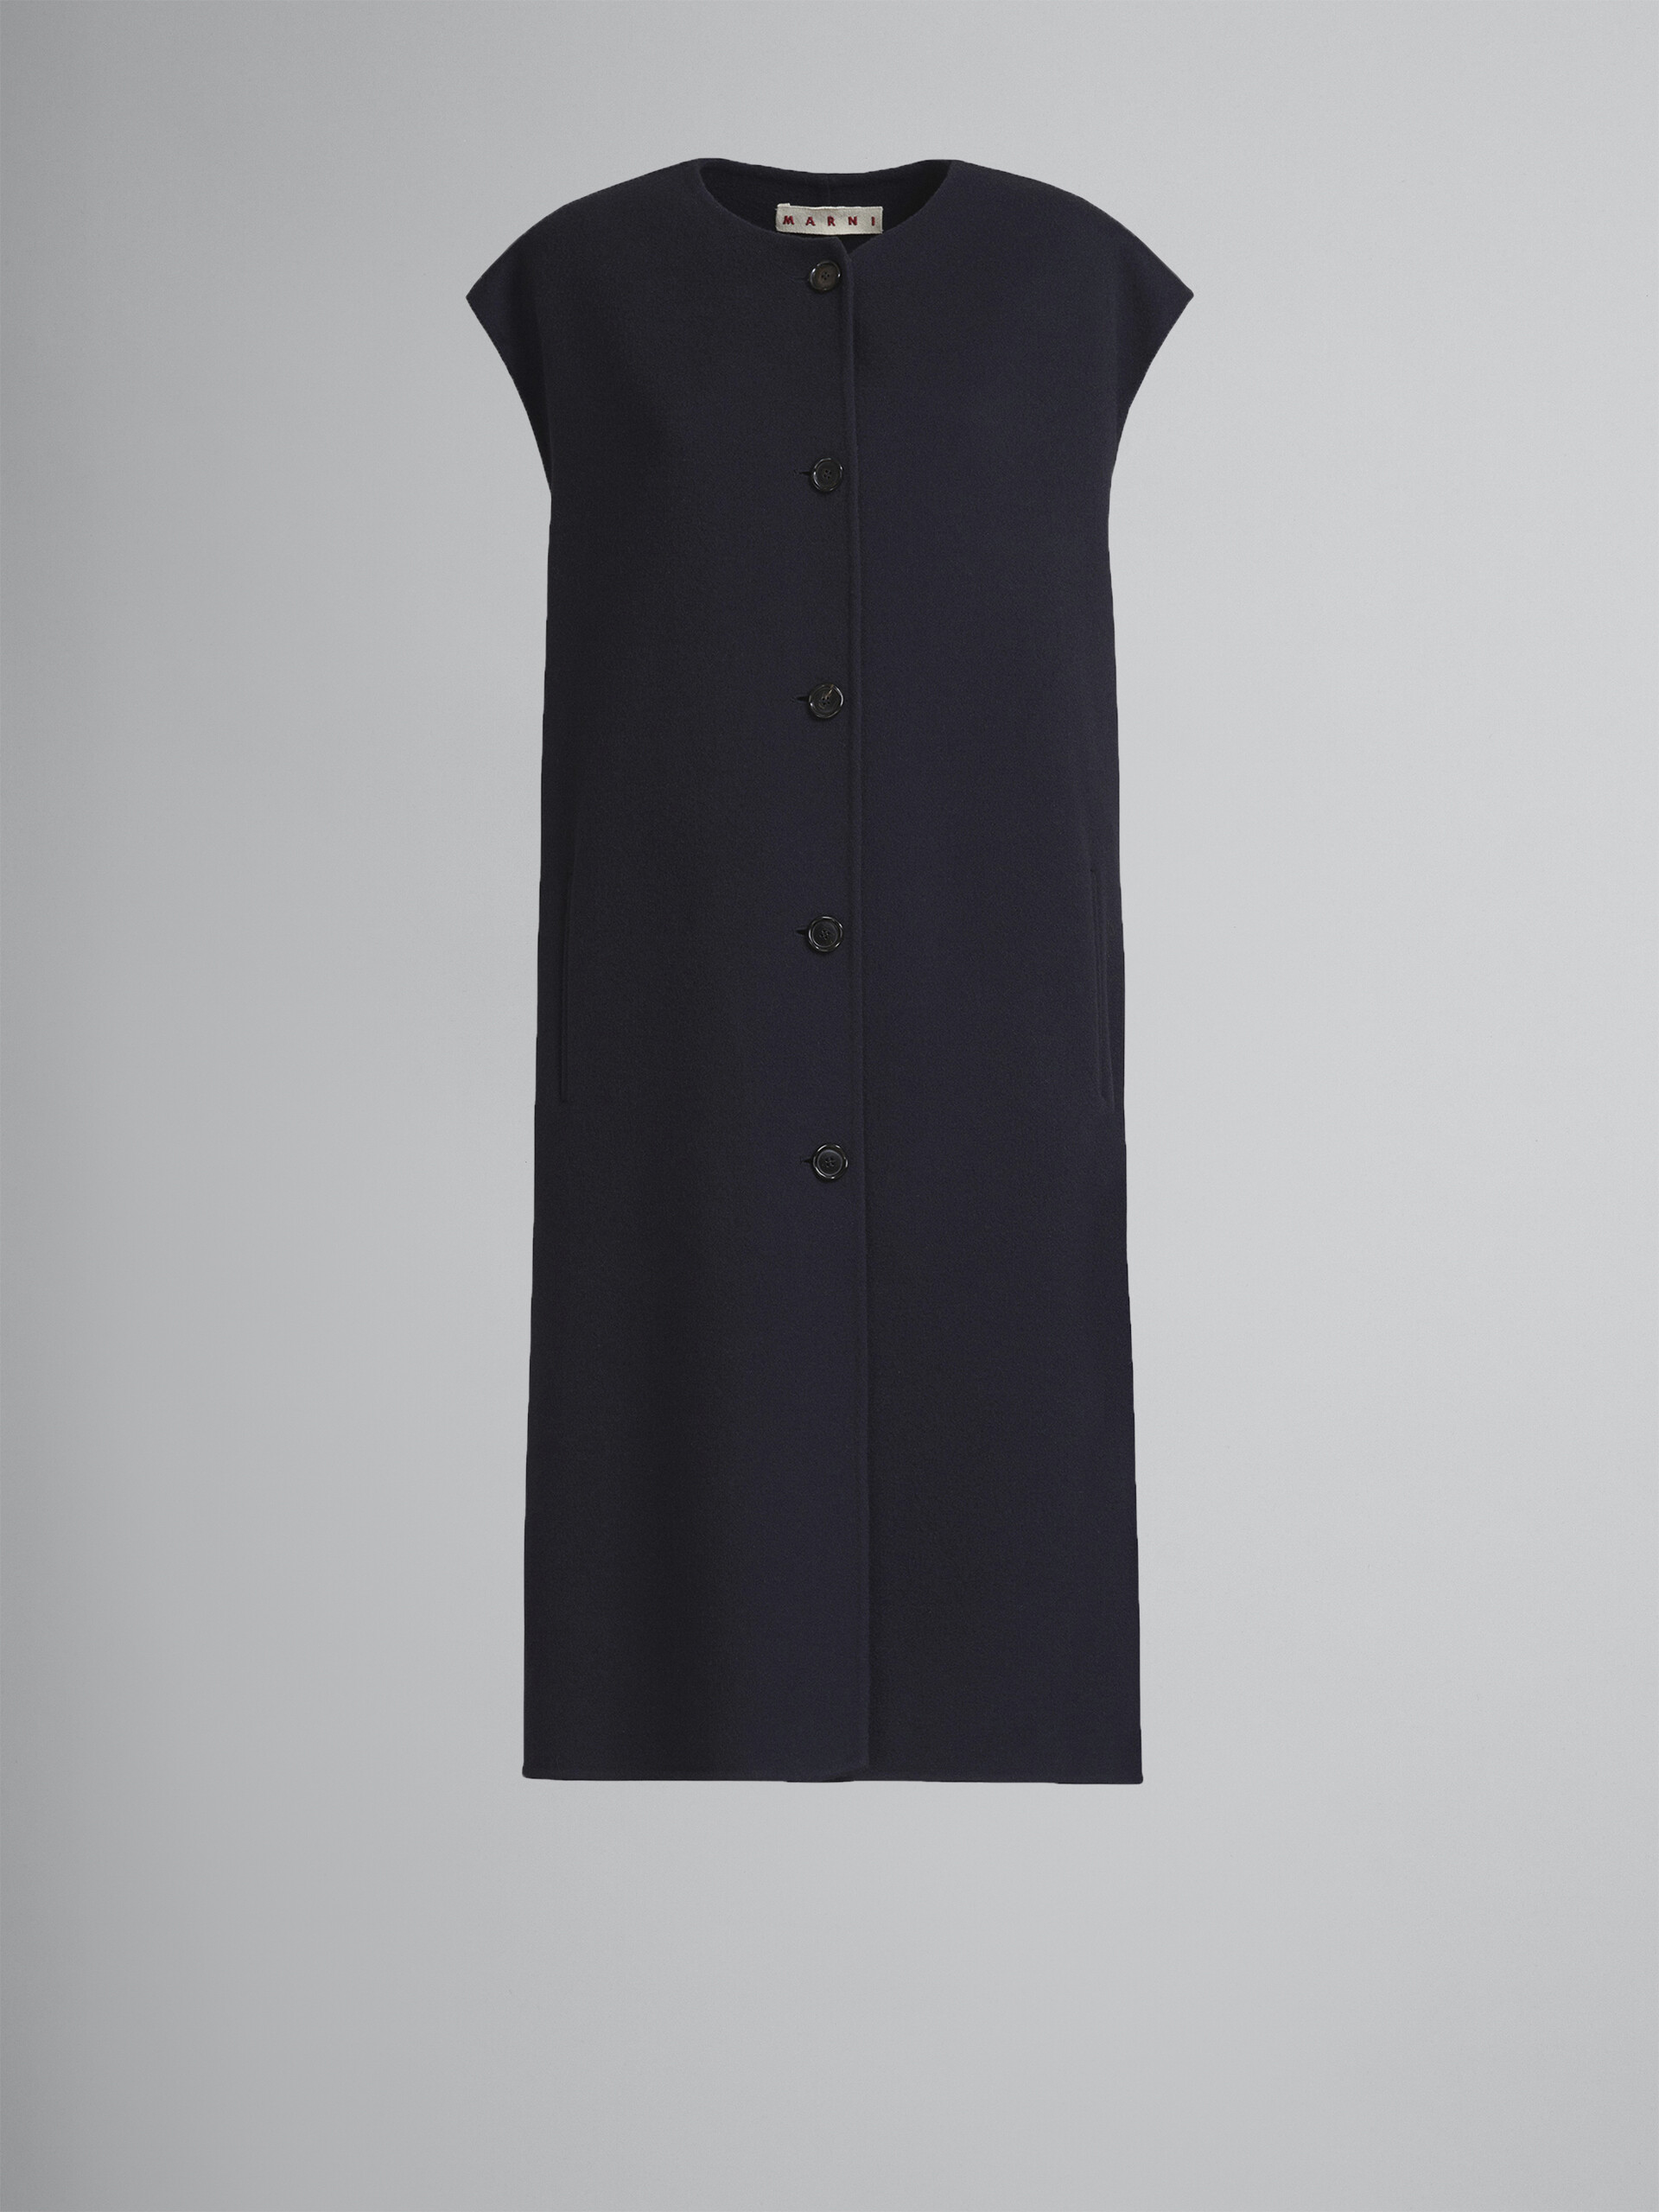 Wool and cashmere long vest - Waistcoats - Image 1